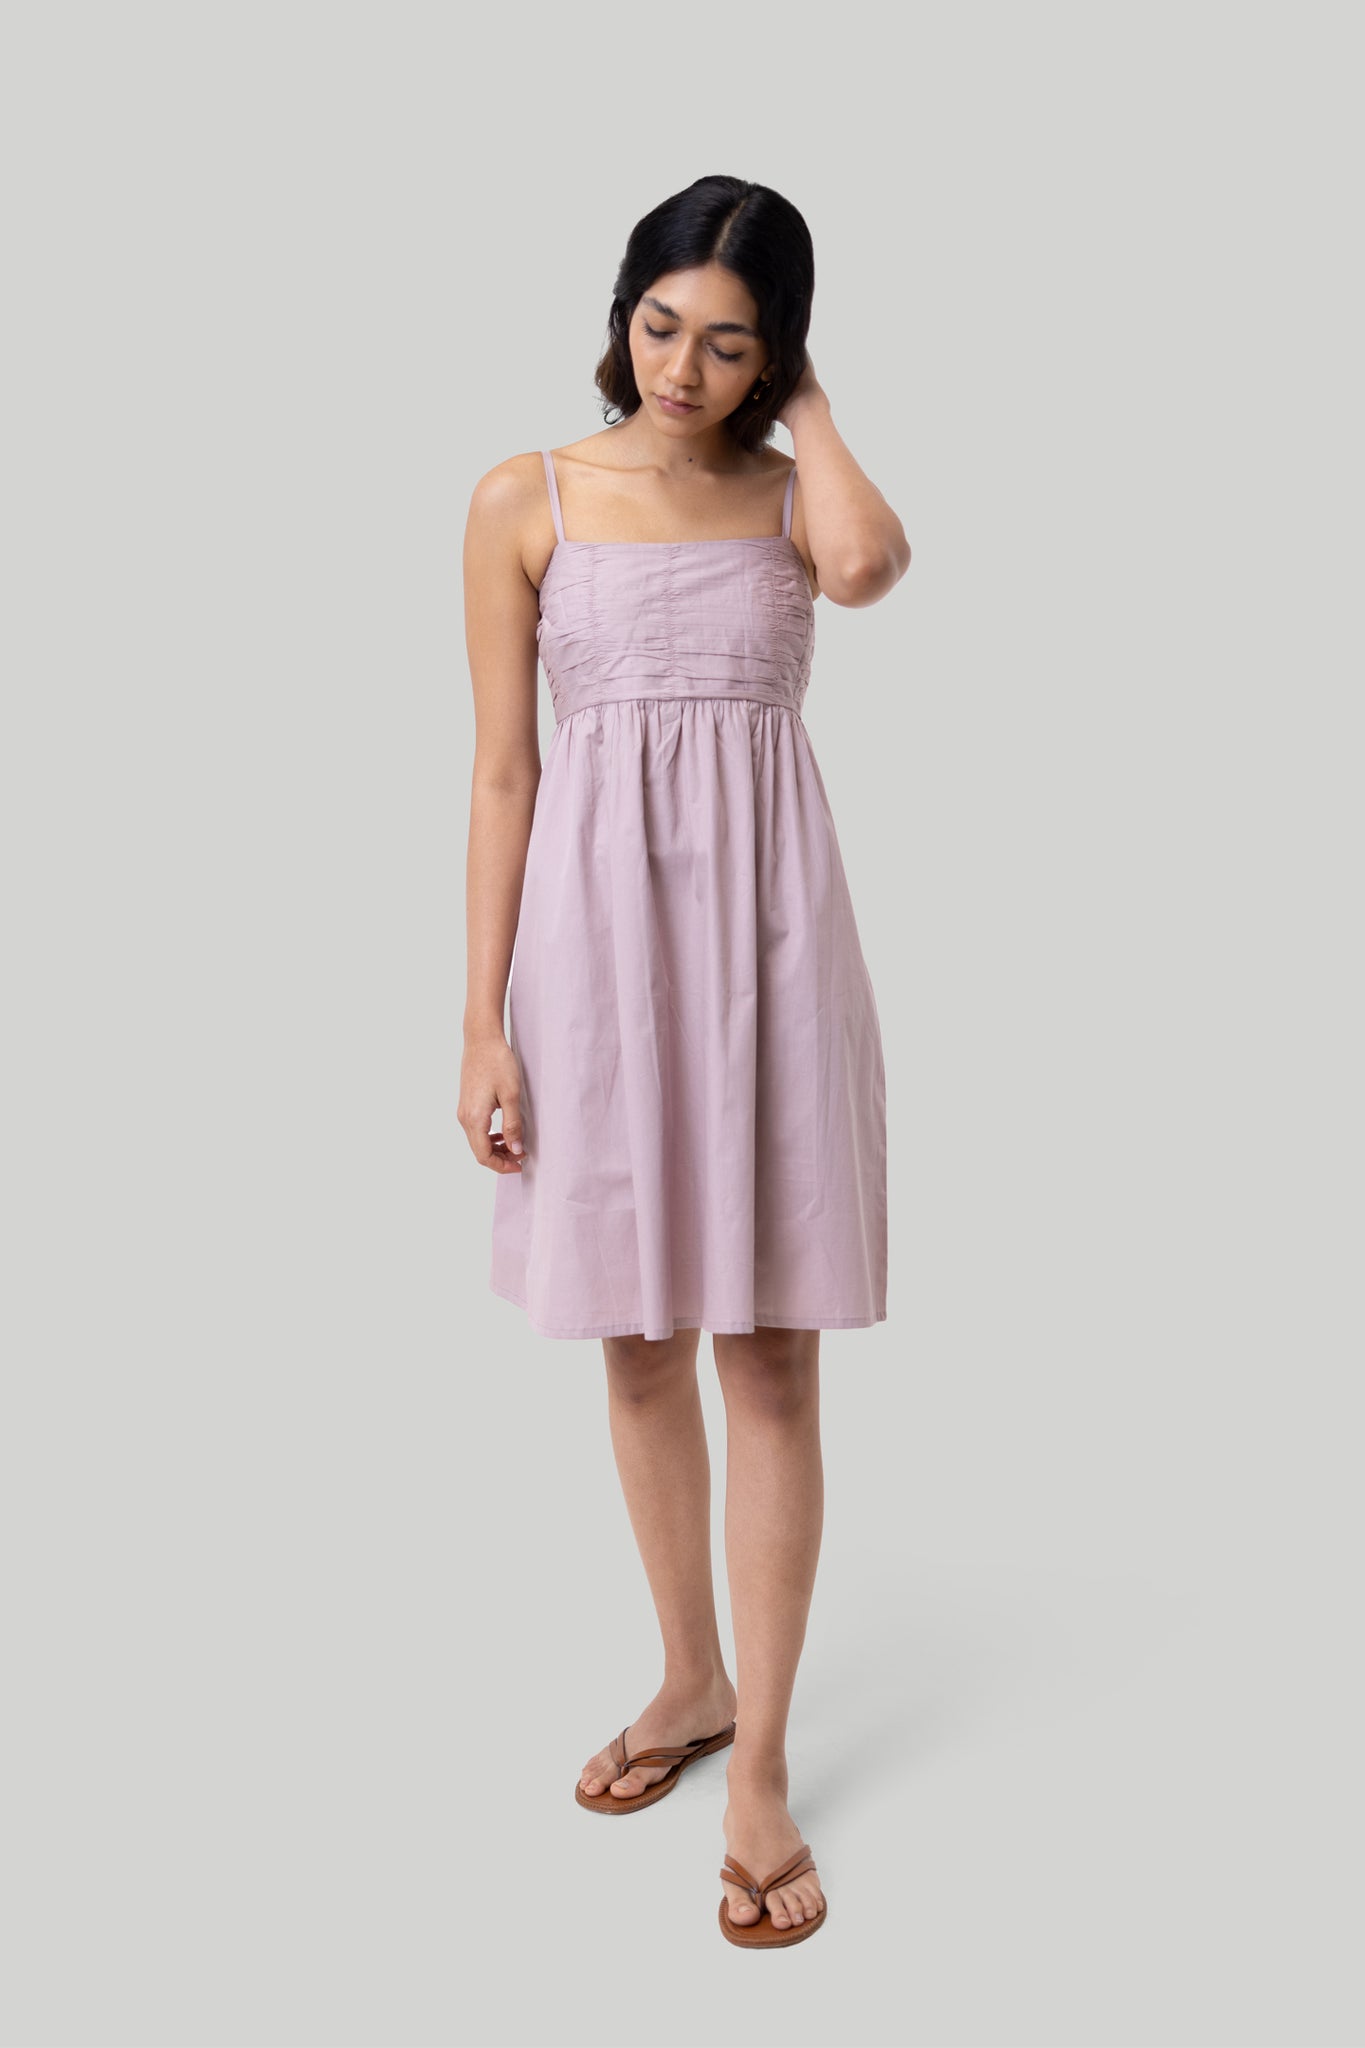 Ruched Strappy Pink Mini Dress 06